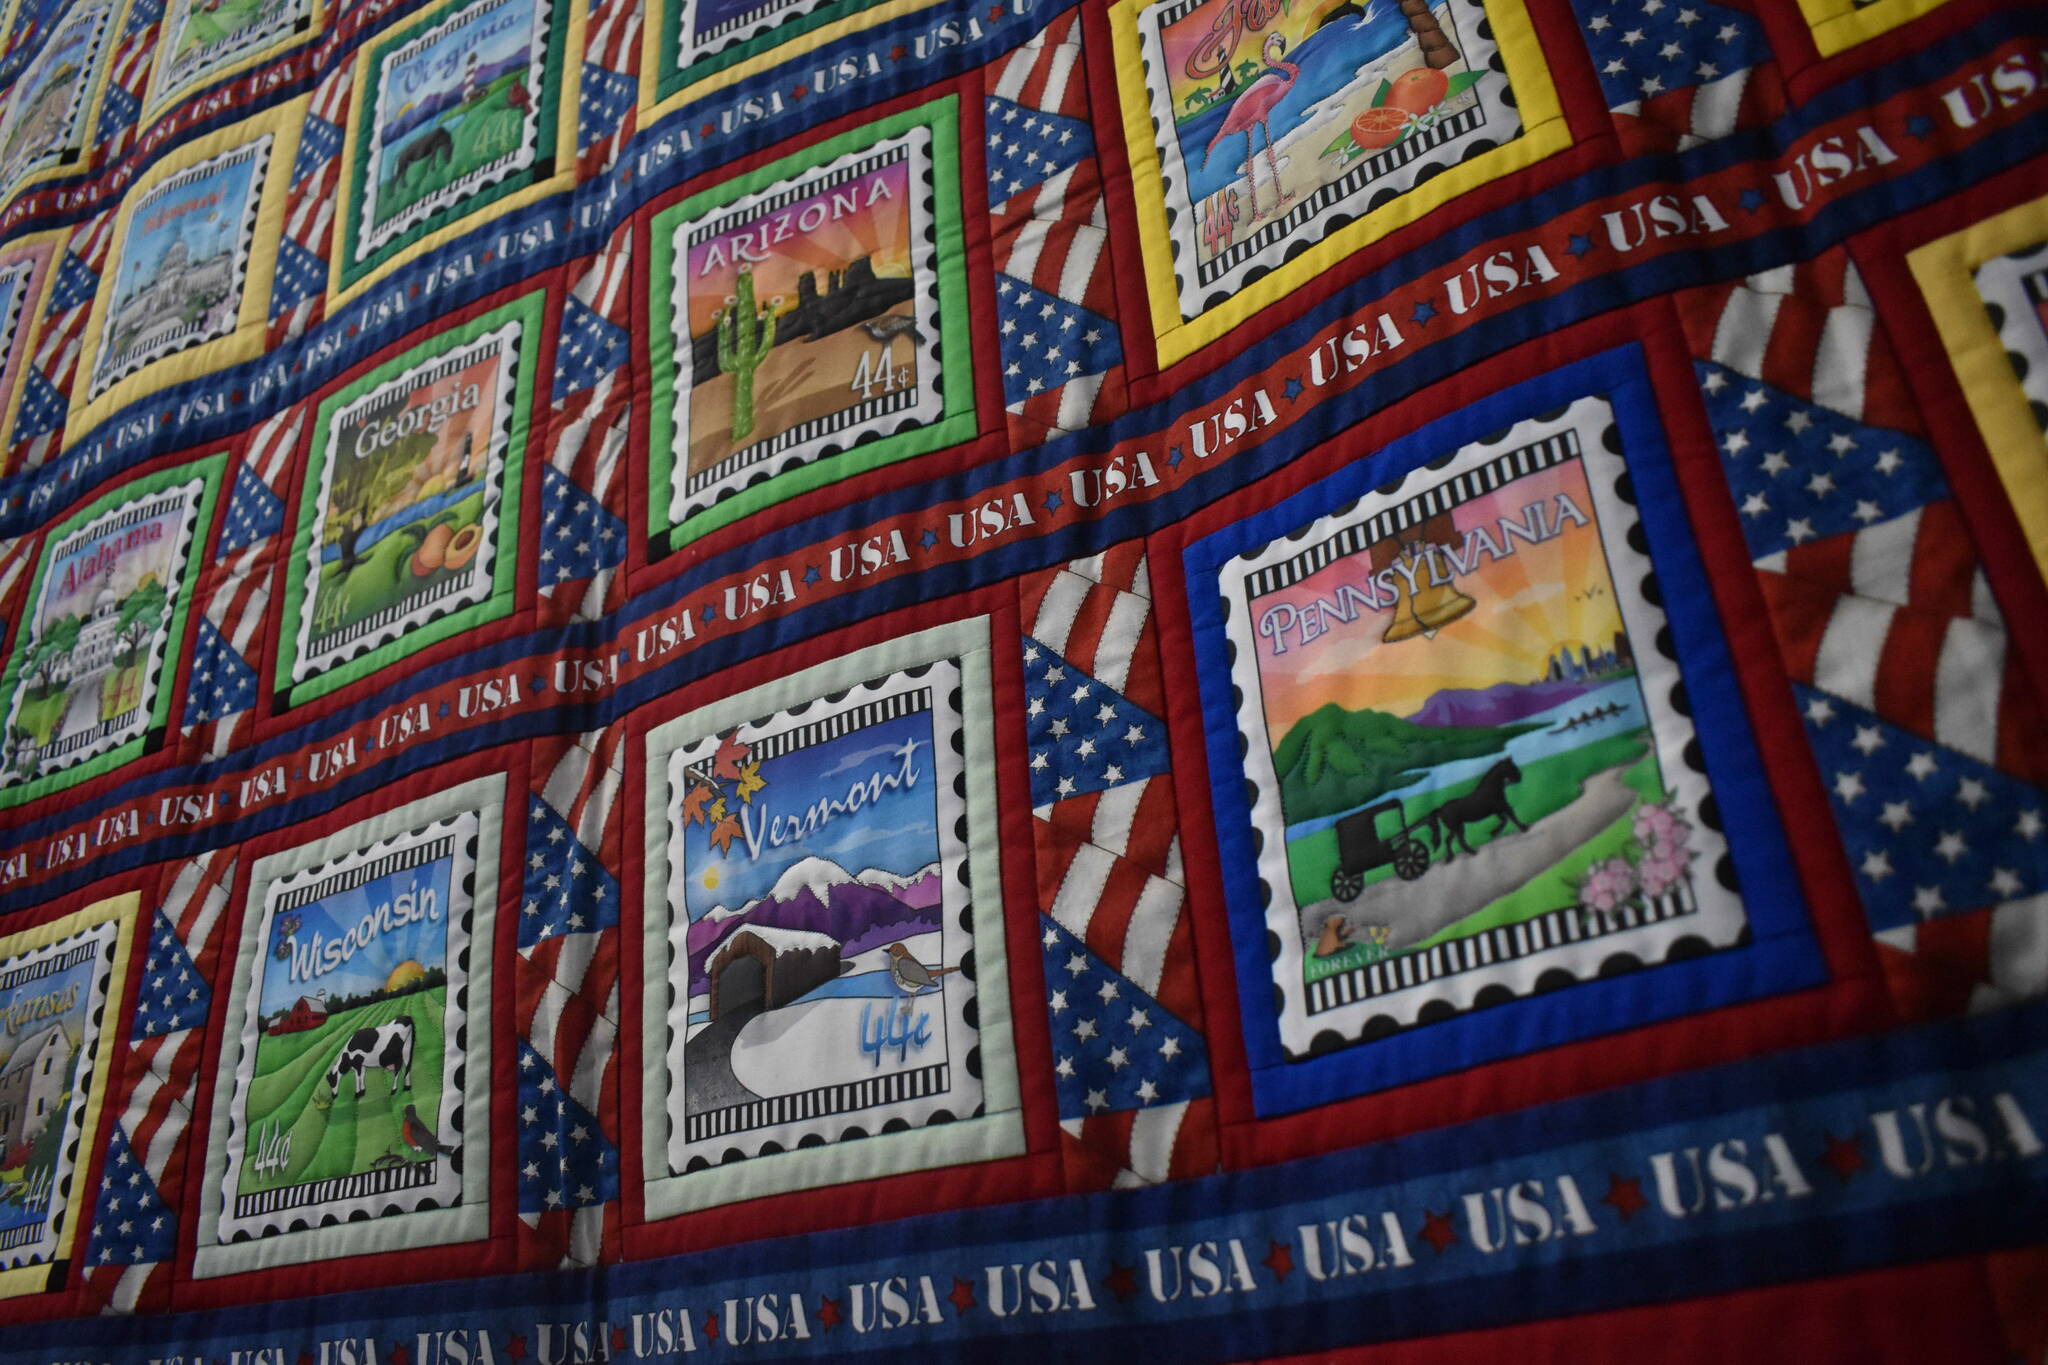 The Crystal Quilters of Enumclaw held their annual two-day quilt show last weekend at the Enumclaw Expo Center, showing off unique patterns, detailed stitchwork and quilts with decades of history. Pictured is Lisa Larkin’s “A Marathoner’s Story” quilt, containing postcard designs from each of the 50 states and several other landmarks, made to commemorate her husband’s marathons in each of those locations. Photo by Alex Bruell